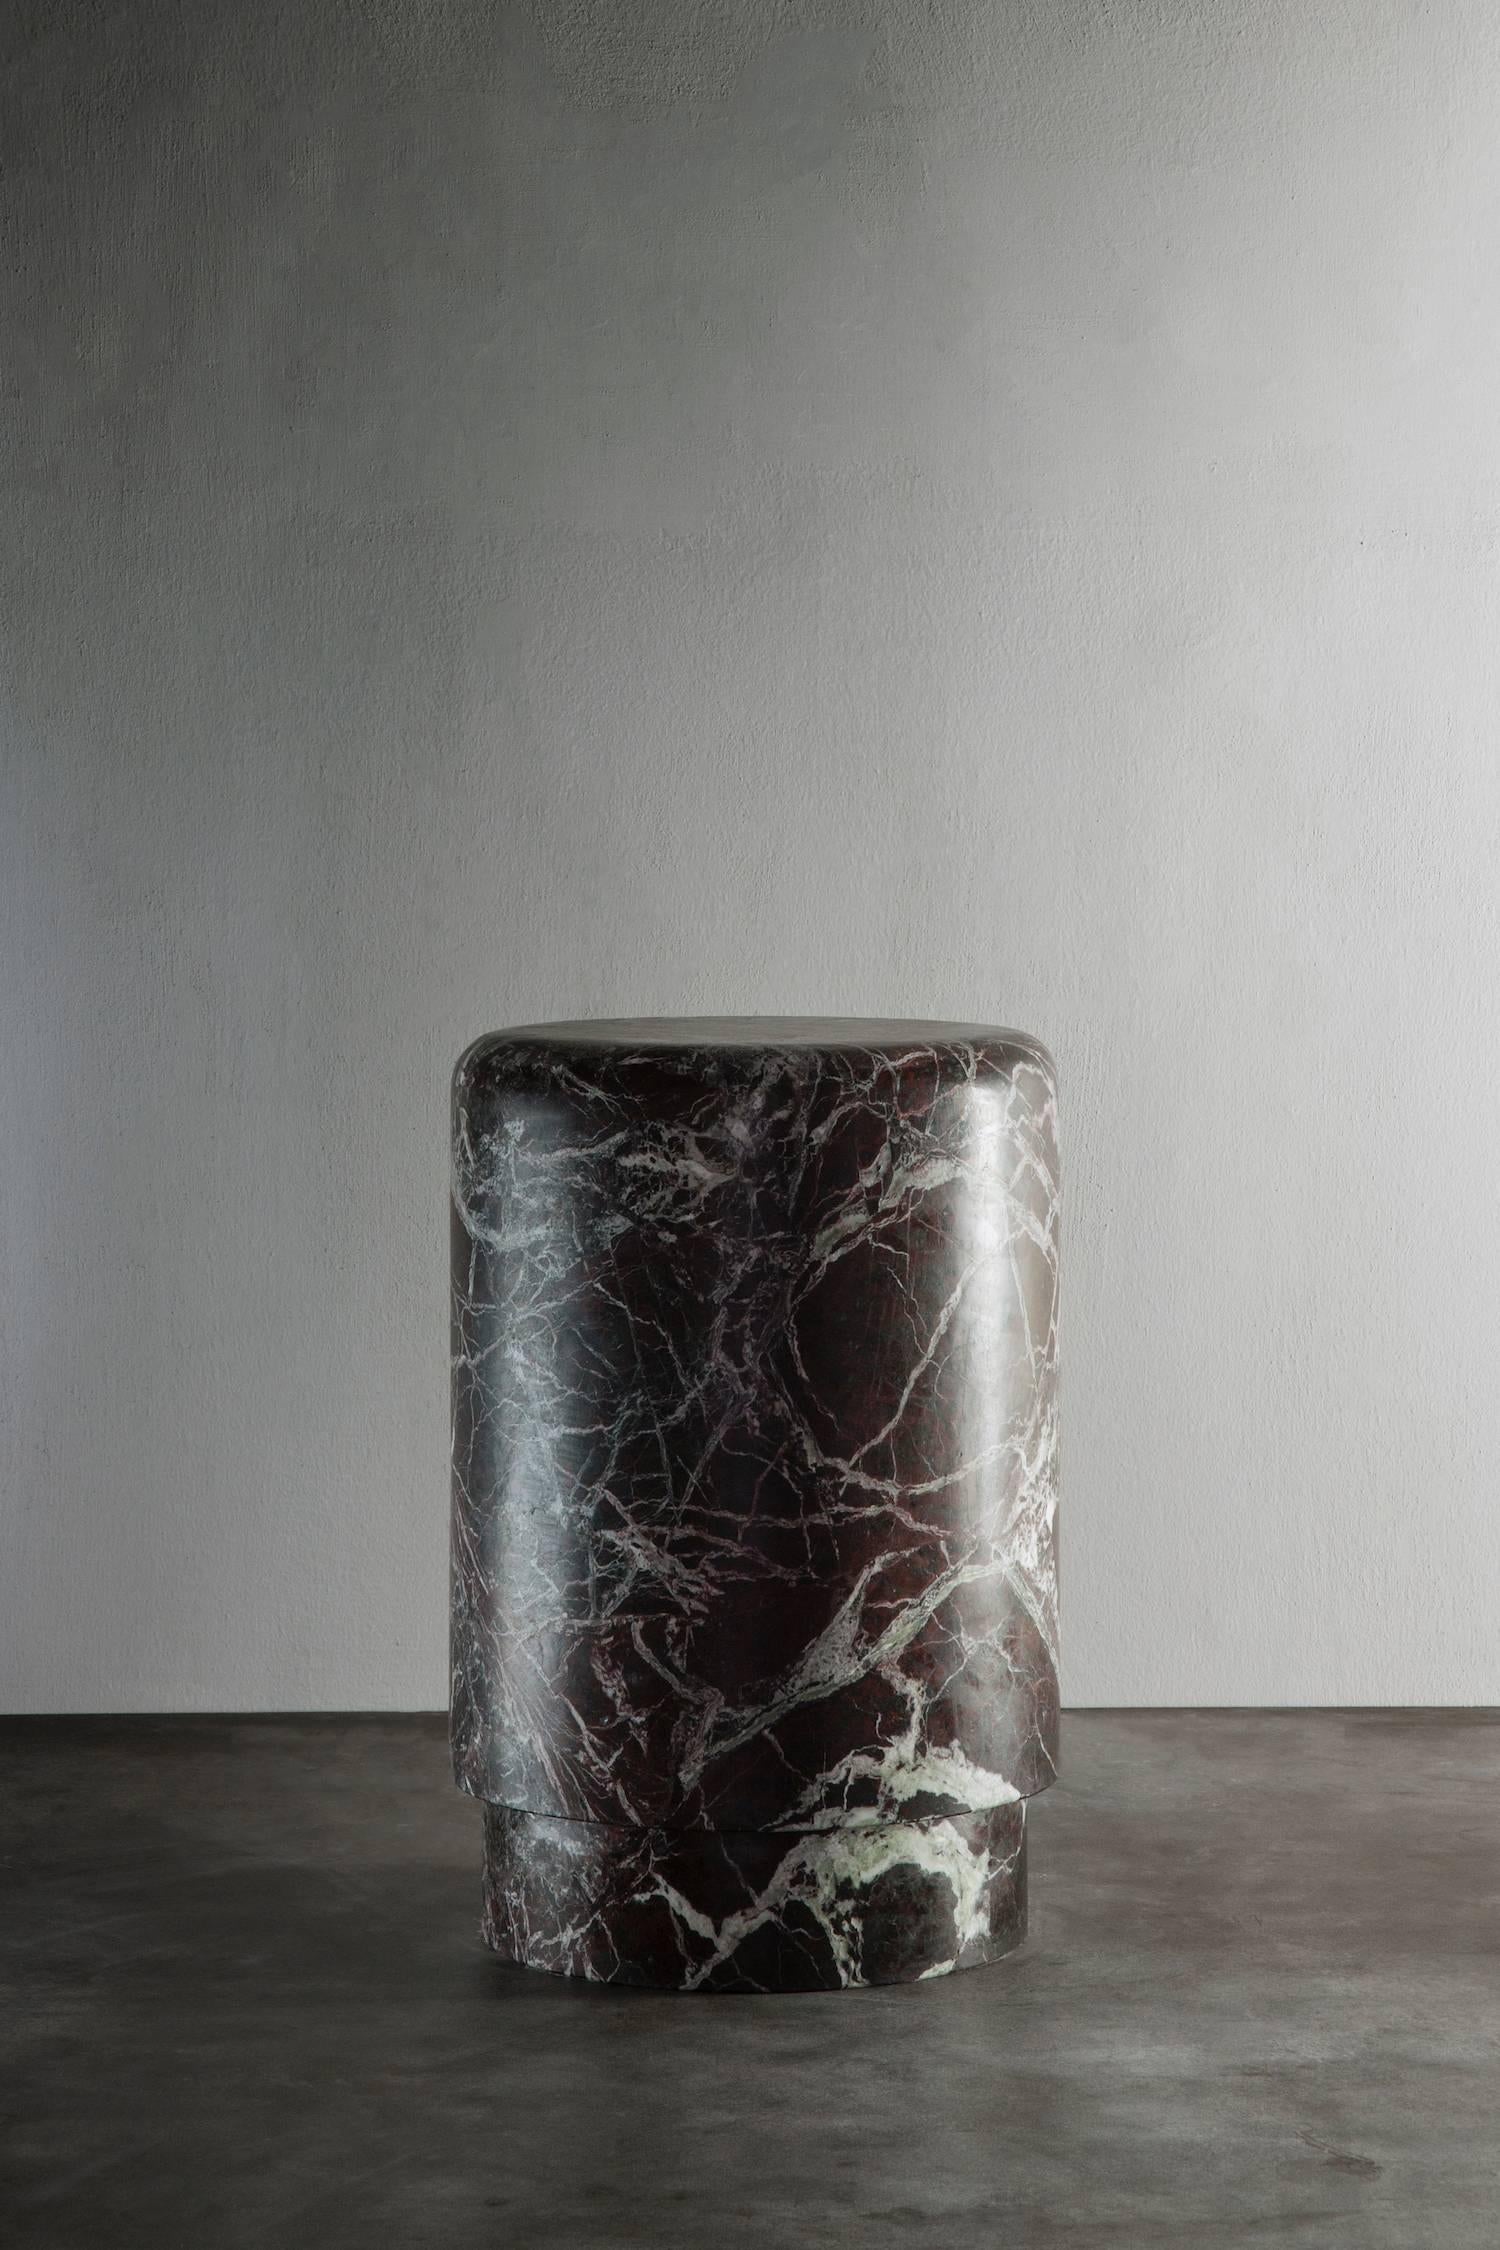 Pouf/small table in dark bordeaux marble - 'rosso levanto marble' from Michaël Verheyden. The piece is hollow.
Please note: This item is located in our New York City Studio and will be shipped from there.